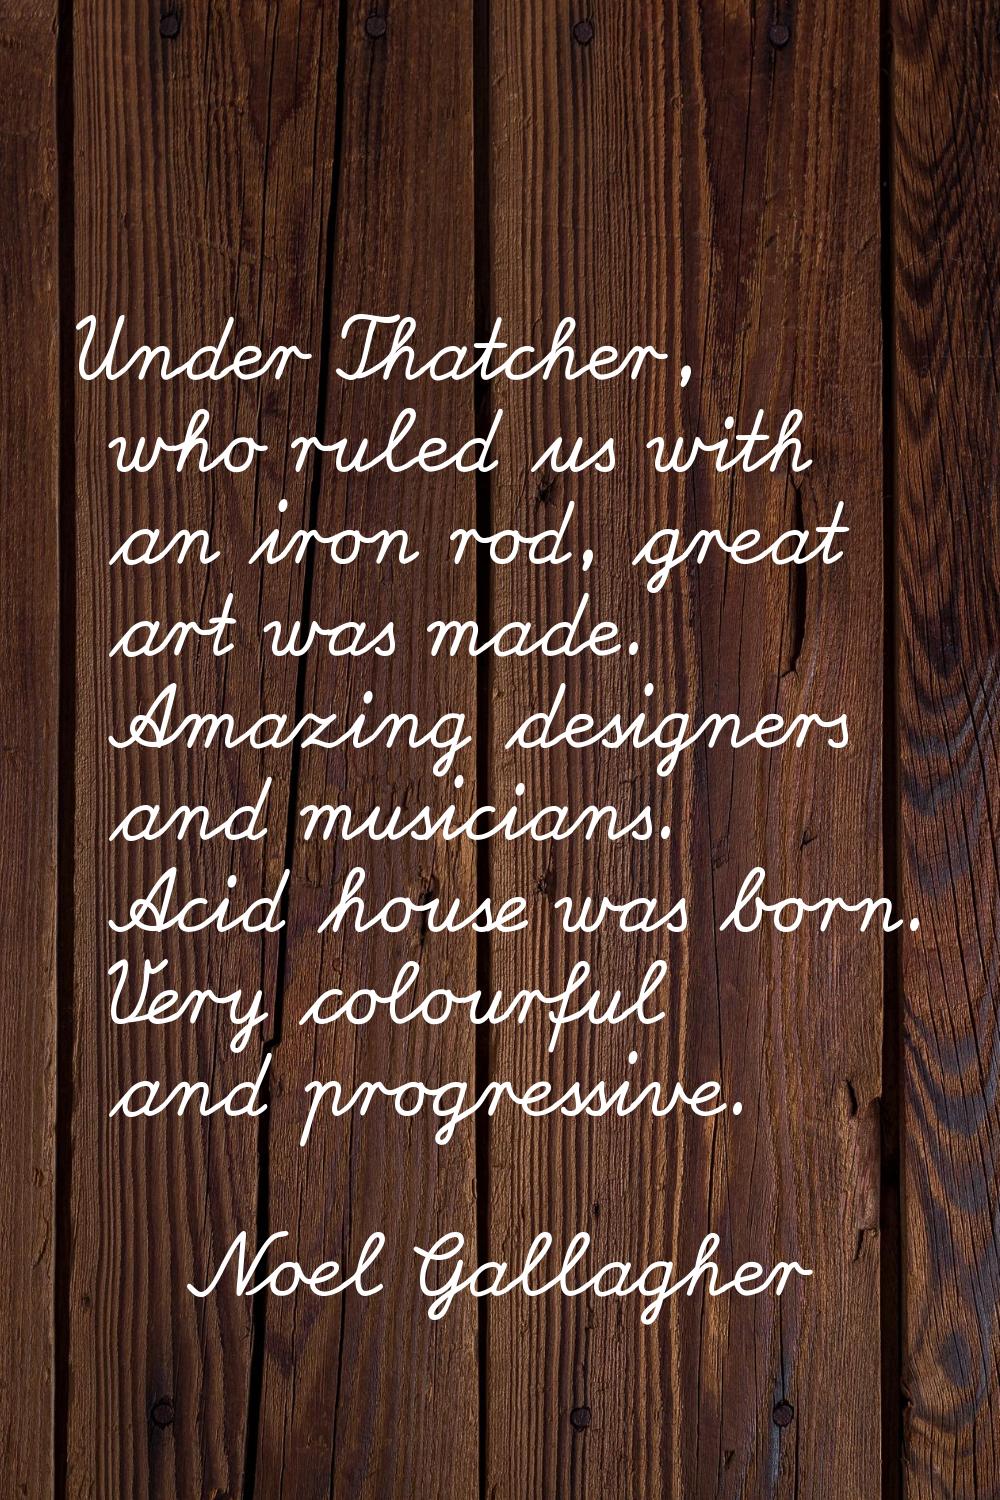 Under Thatcher, who ruled us with an iron rod, great art was made. Amazing designers and musicians.